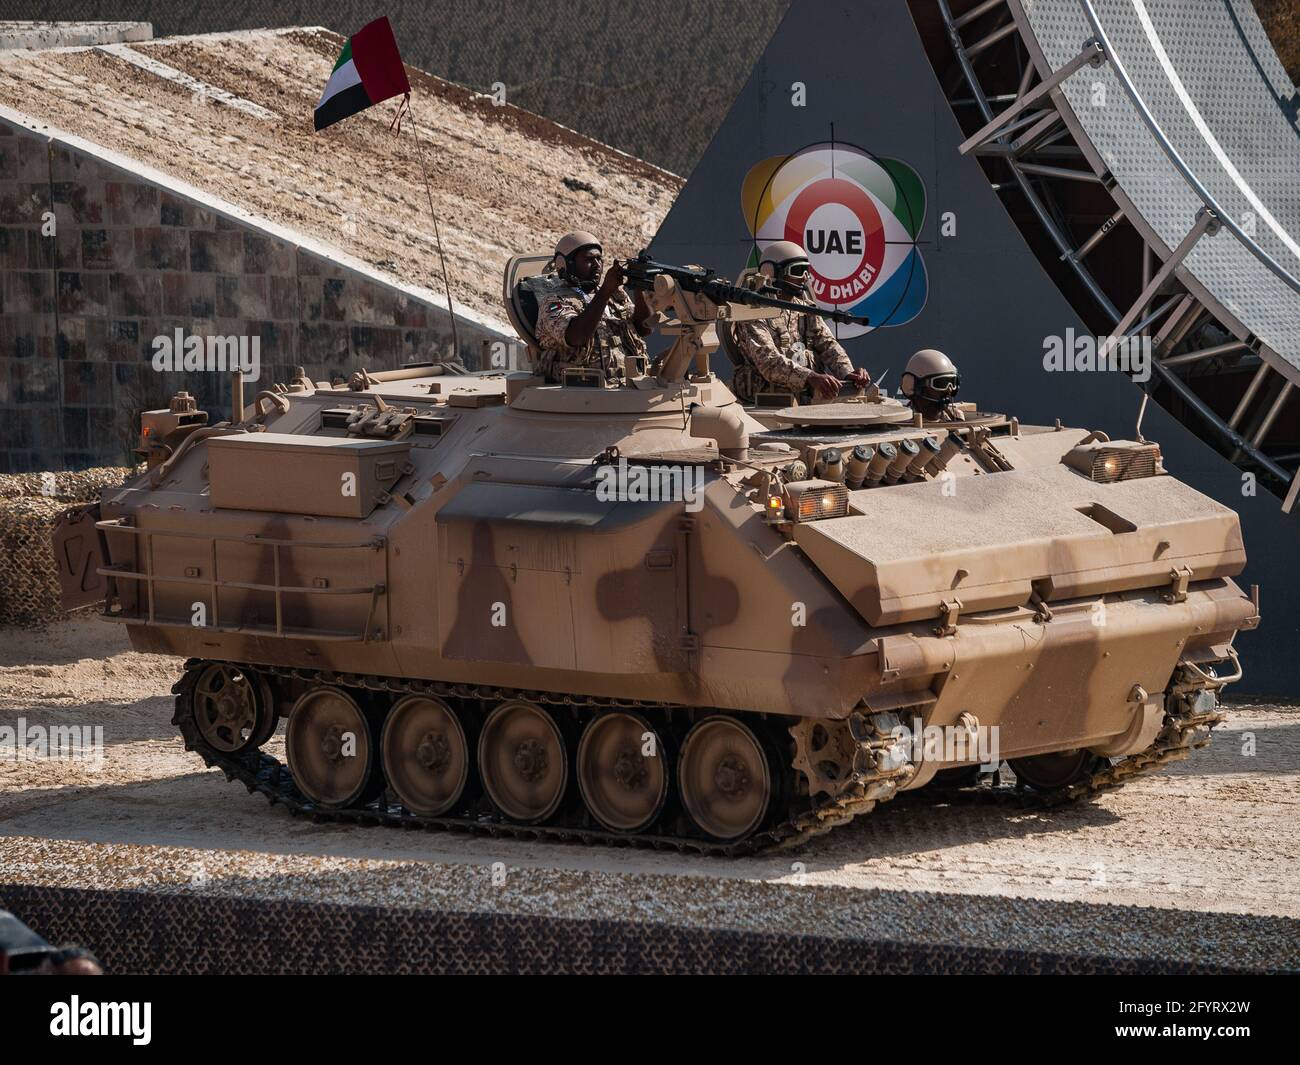 Abu Dhabi, UAE - Feb.20.2013: FNSS ACV-300 APC (Armoured personnel carrier) at IDEX 2015 IDEX 2013 military exibition Stock Photo